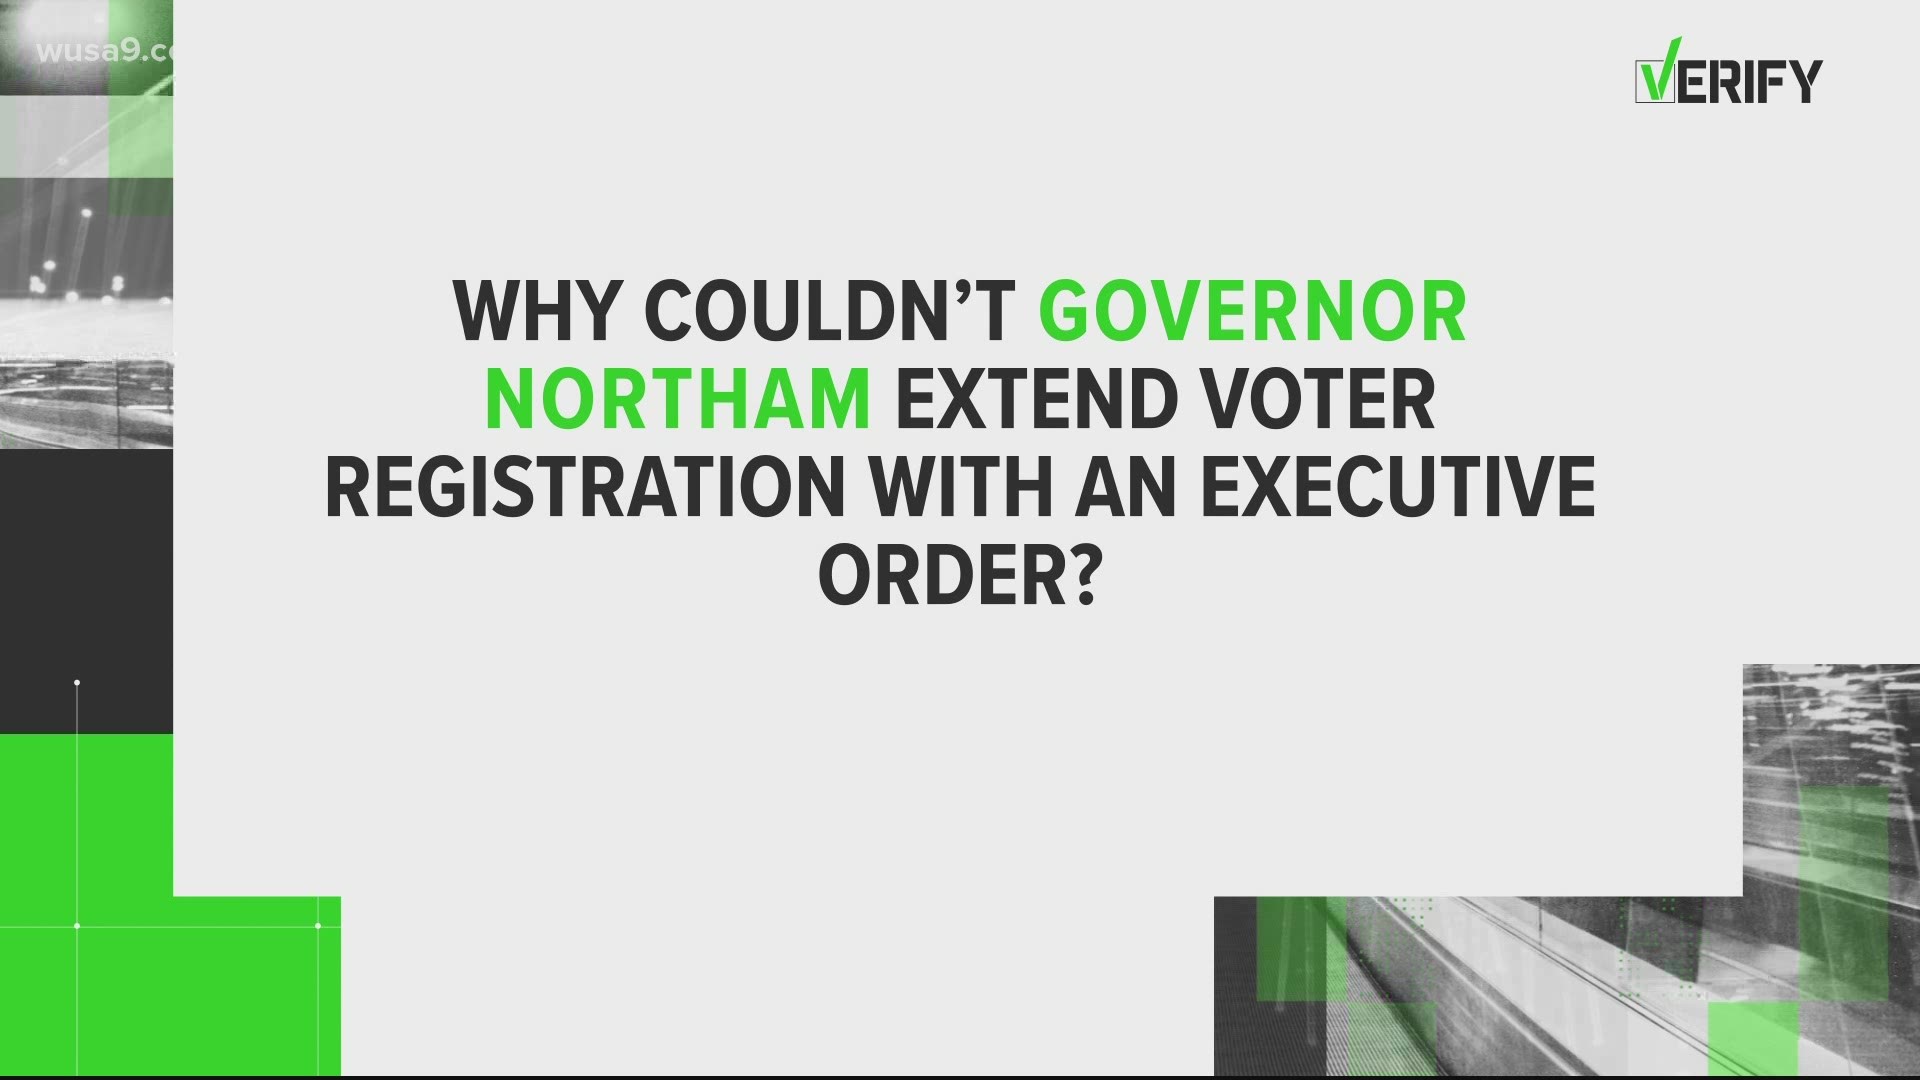 Regarding extending voter registration, Gov. Northam said on Oct. 13, "it does not appear that I have the authority to change it." Here's a look at why.